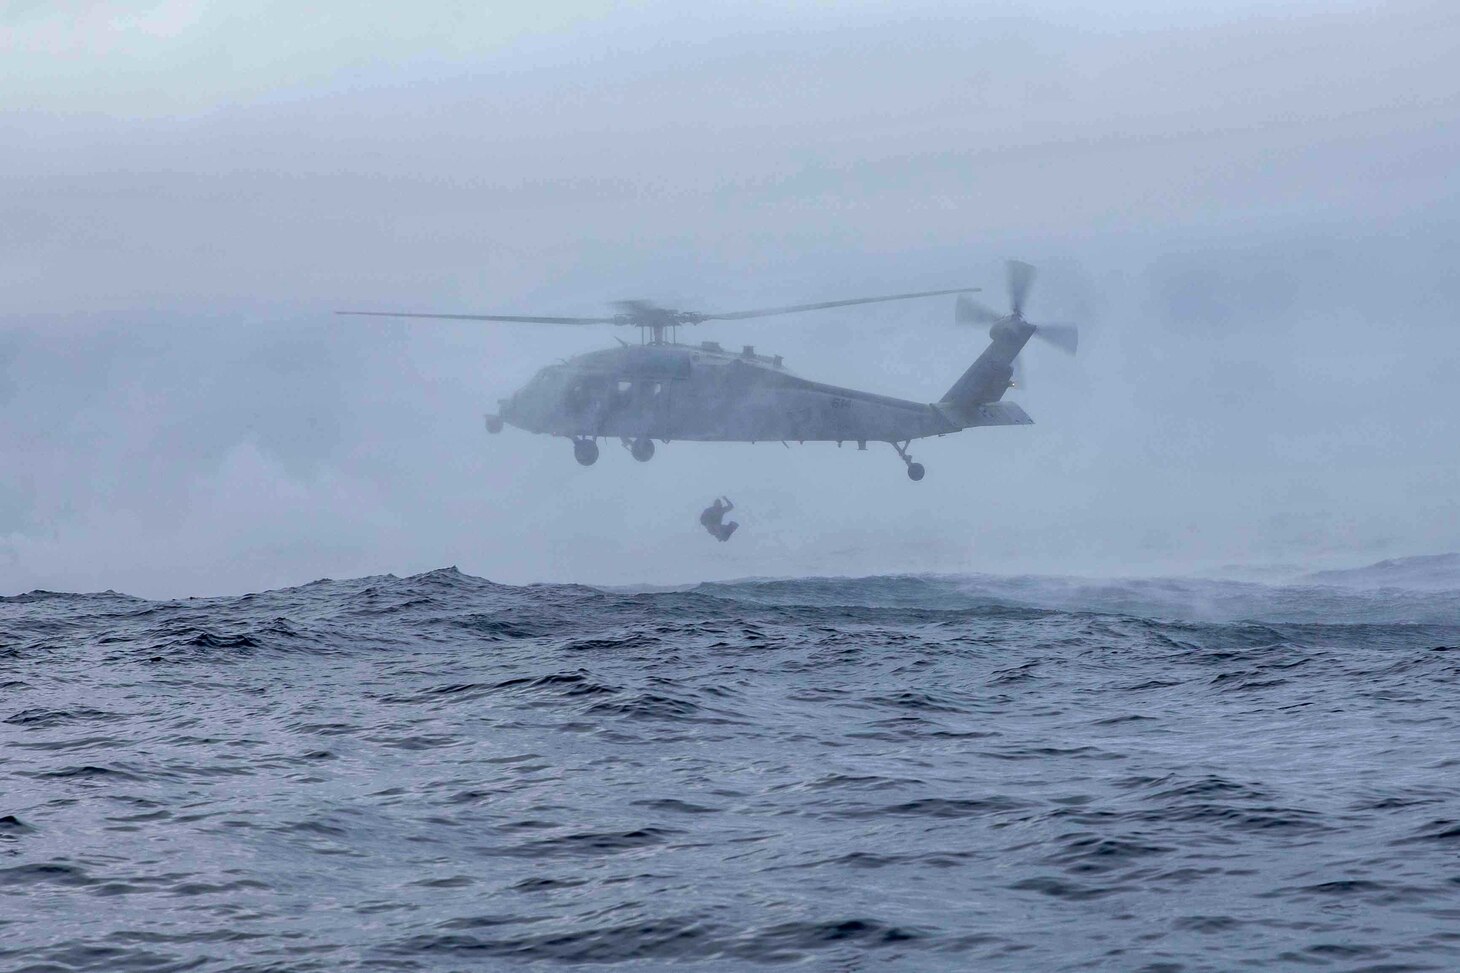 A Sailor assigned to Explosive Ordnance Disposal Mobile Unit 12 jumps from an MH-60S Sea Hawk helicopter, attached to Helicopter Sea Combat Squadron (HSC) 5, during a floating mine response exercise, Dec. 14, 2022. Carrier Air Wing (CVW) 7 is the offensive air and strike component of Carrier Strike Group (CSG) 10, George H.W. Bush CSG. The squadrons of CVW-7 are Strike Fighter Squadron (VFA) 86, VFA-103, VFA-136, VFA-143, Electronic Attack Squadron (VAQ) 140, Carrier Airborne Early Warning Squadron (VAW) 121, HSC-5, and Helicopter maritime Strike Squadron (HSM) 46. The George H.W. Bush CSG is on a scheduled deployment in the U.S. Naval Forces Europe area of operations, employed by U.S. Sixth Fleet to defend U.S., allied and partner interests.